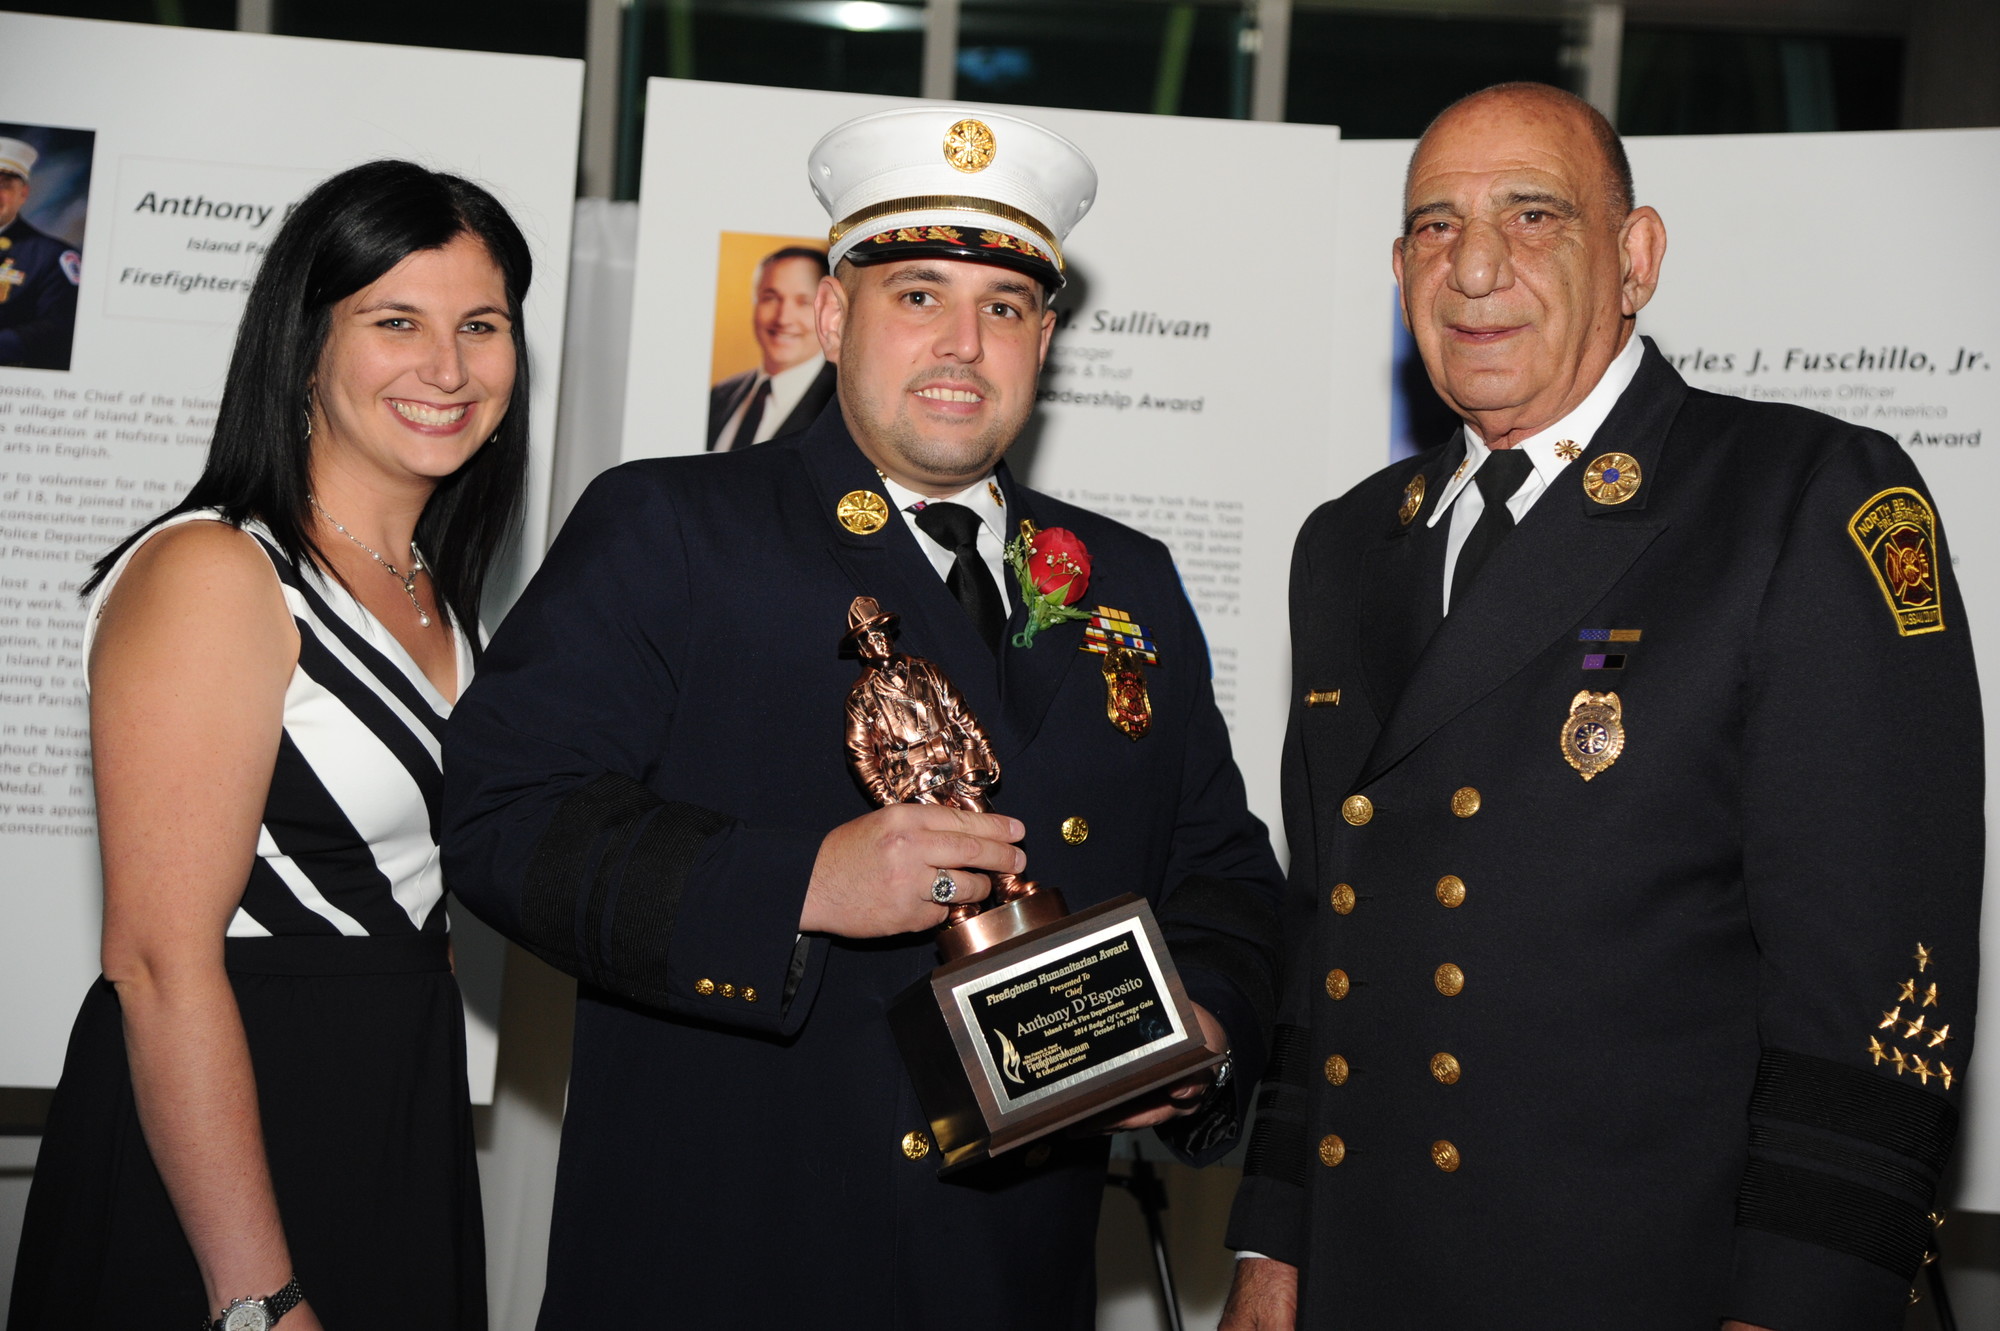 Anthony D’Esposito was presented with the Firefighter Humanitarian Award by executive director of the Nassau County Firefighters Museum Alana Petrocelli, left, and Angelo Catalano, president of the board.